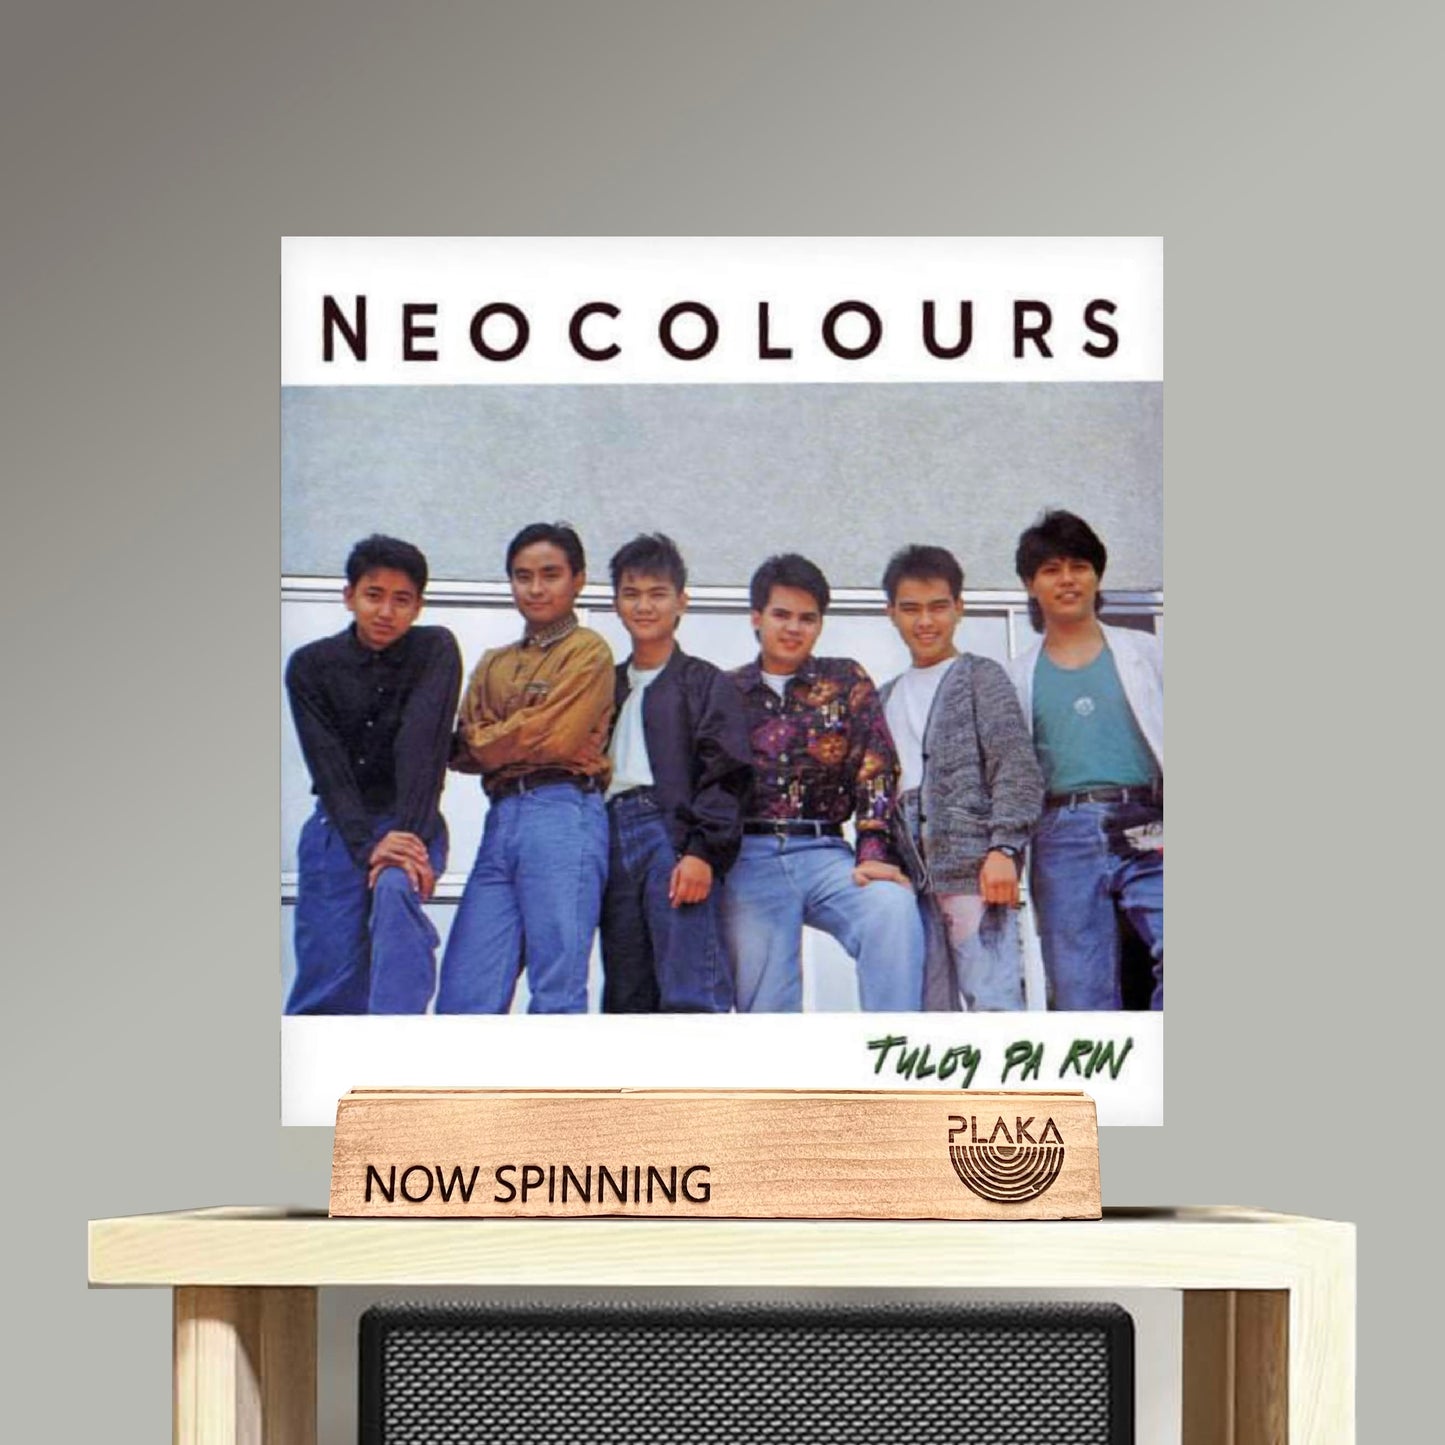 Neocolours - Tuloy Pa Rin